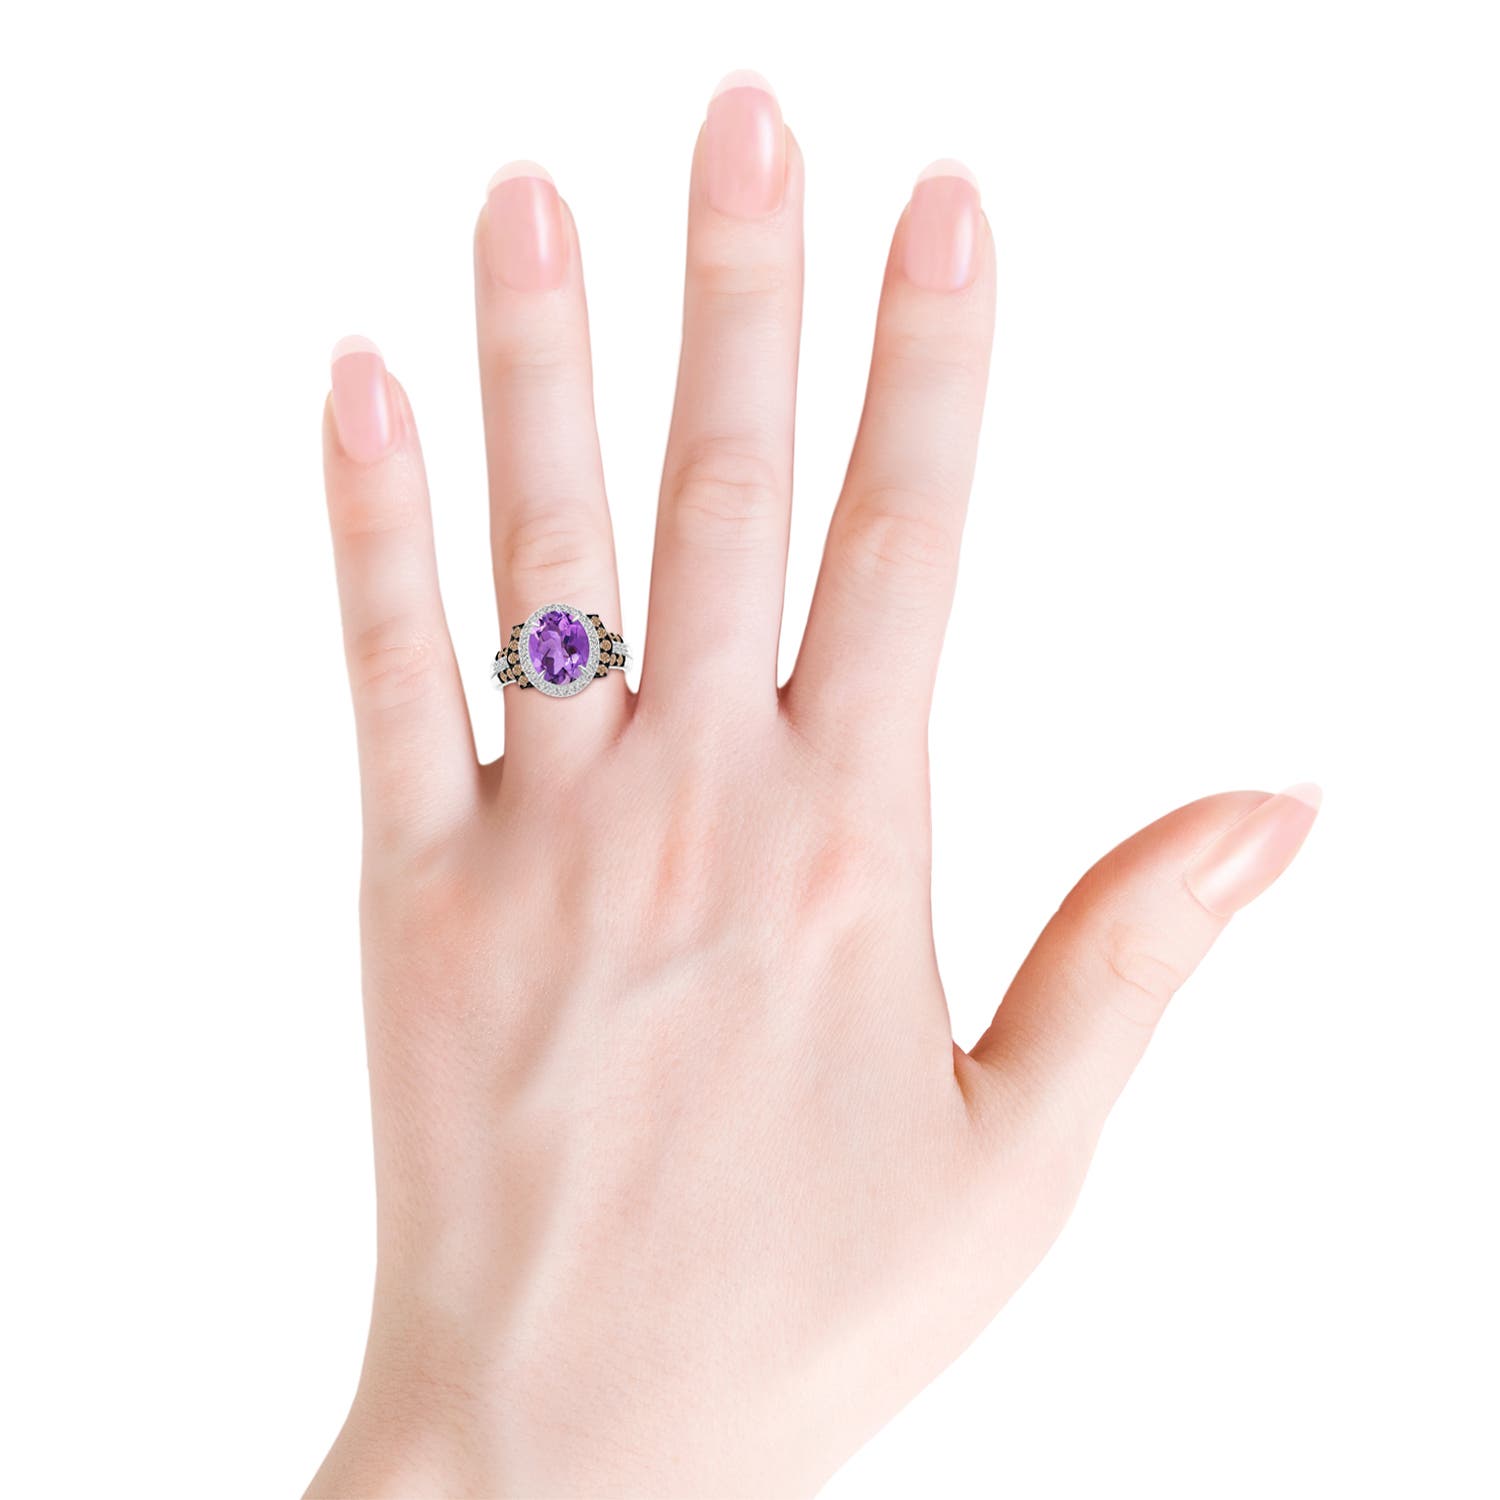 AA - Amethyst / 2.81 CT / 14 KT White Gold